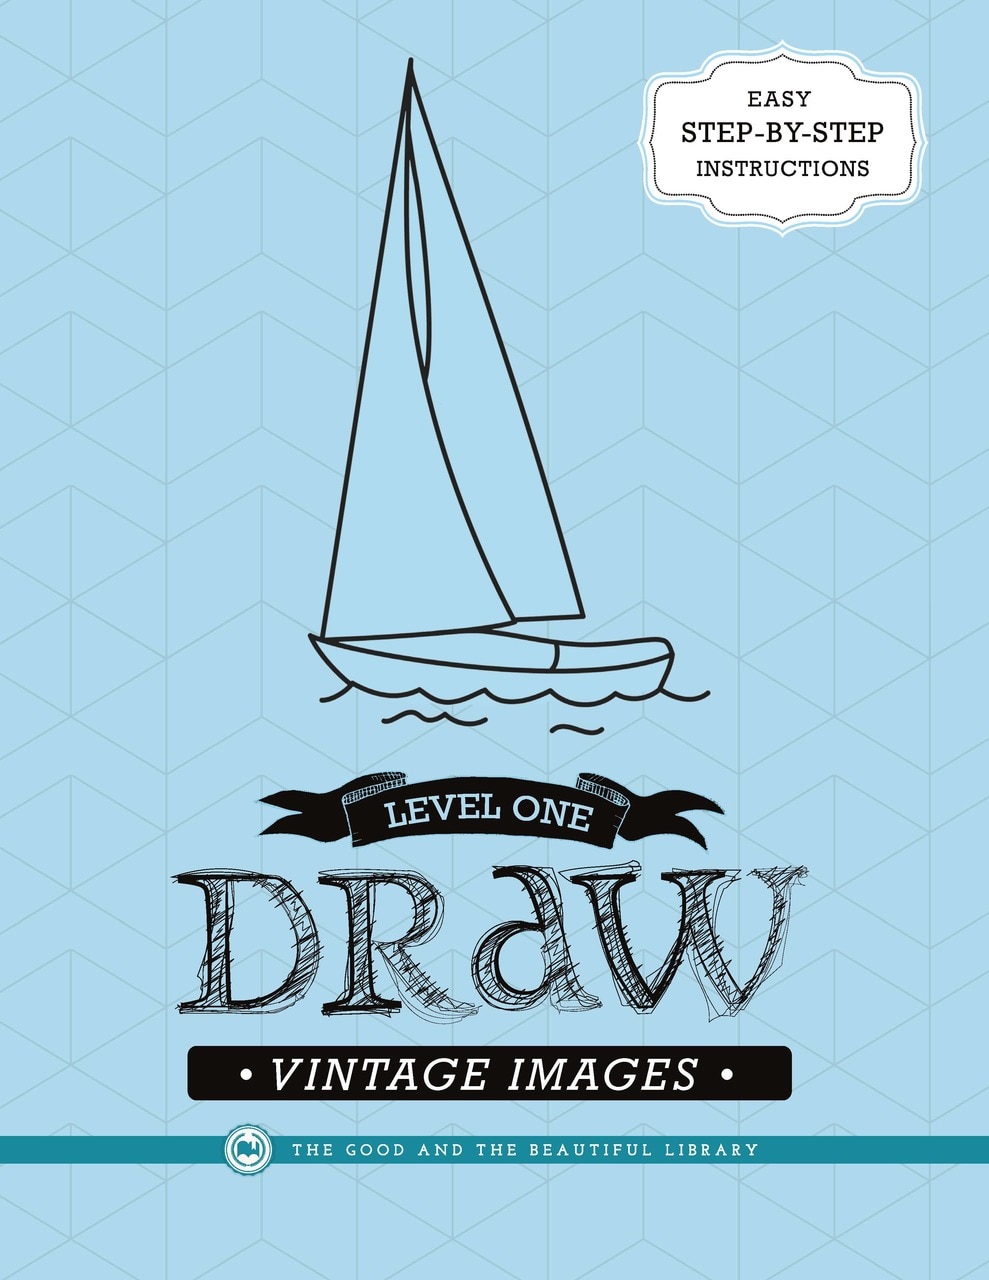 Draw Vintage Images - Level 1 - The Good and the Beautiful